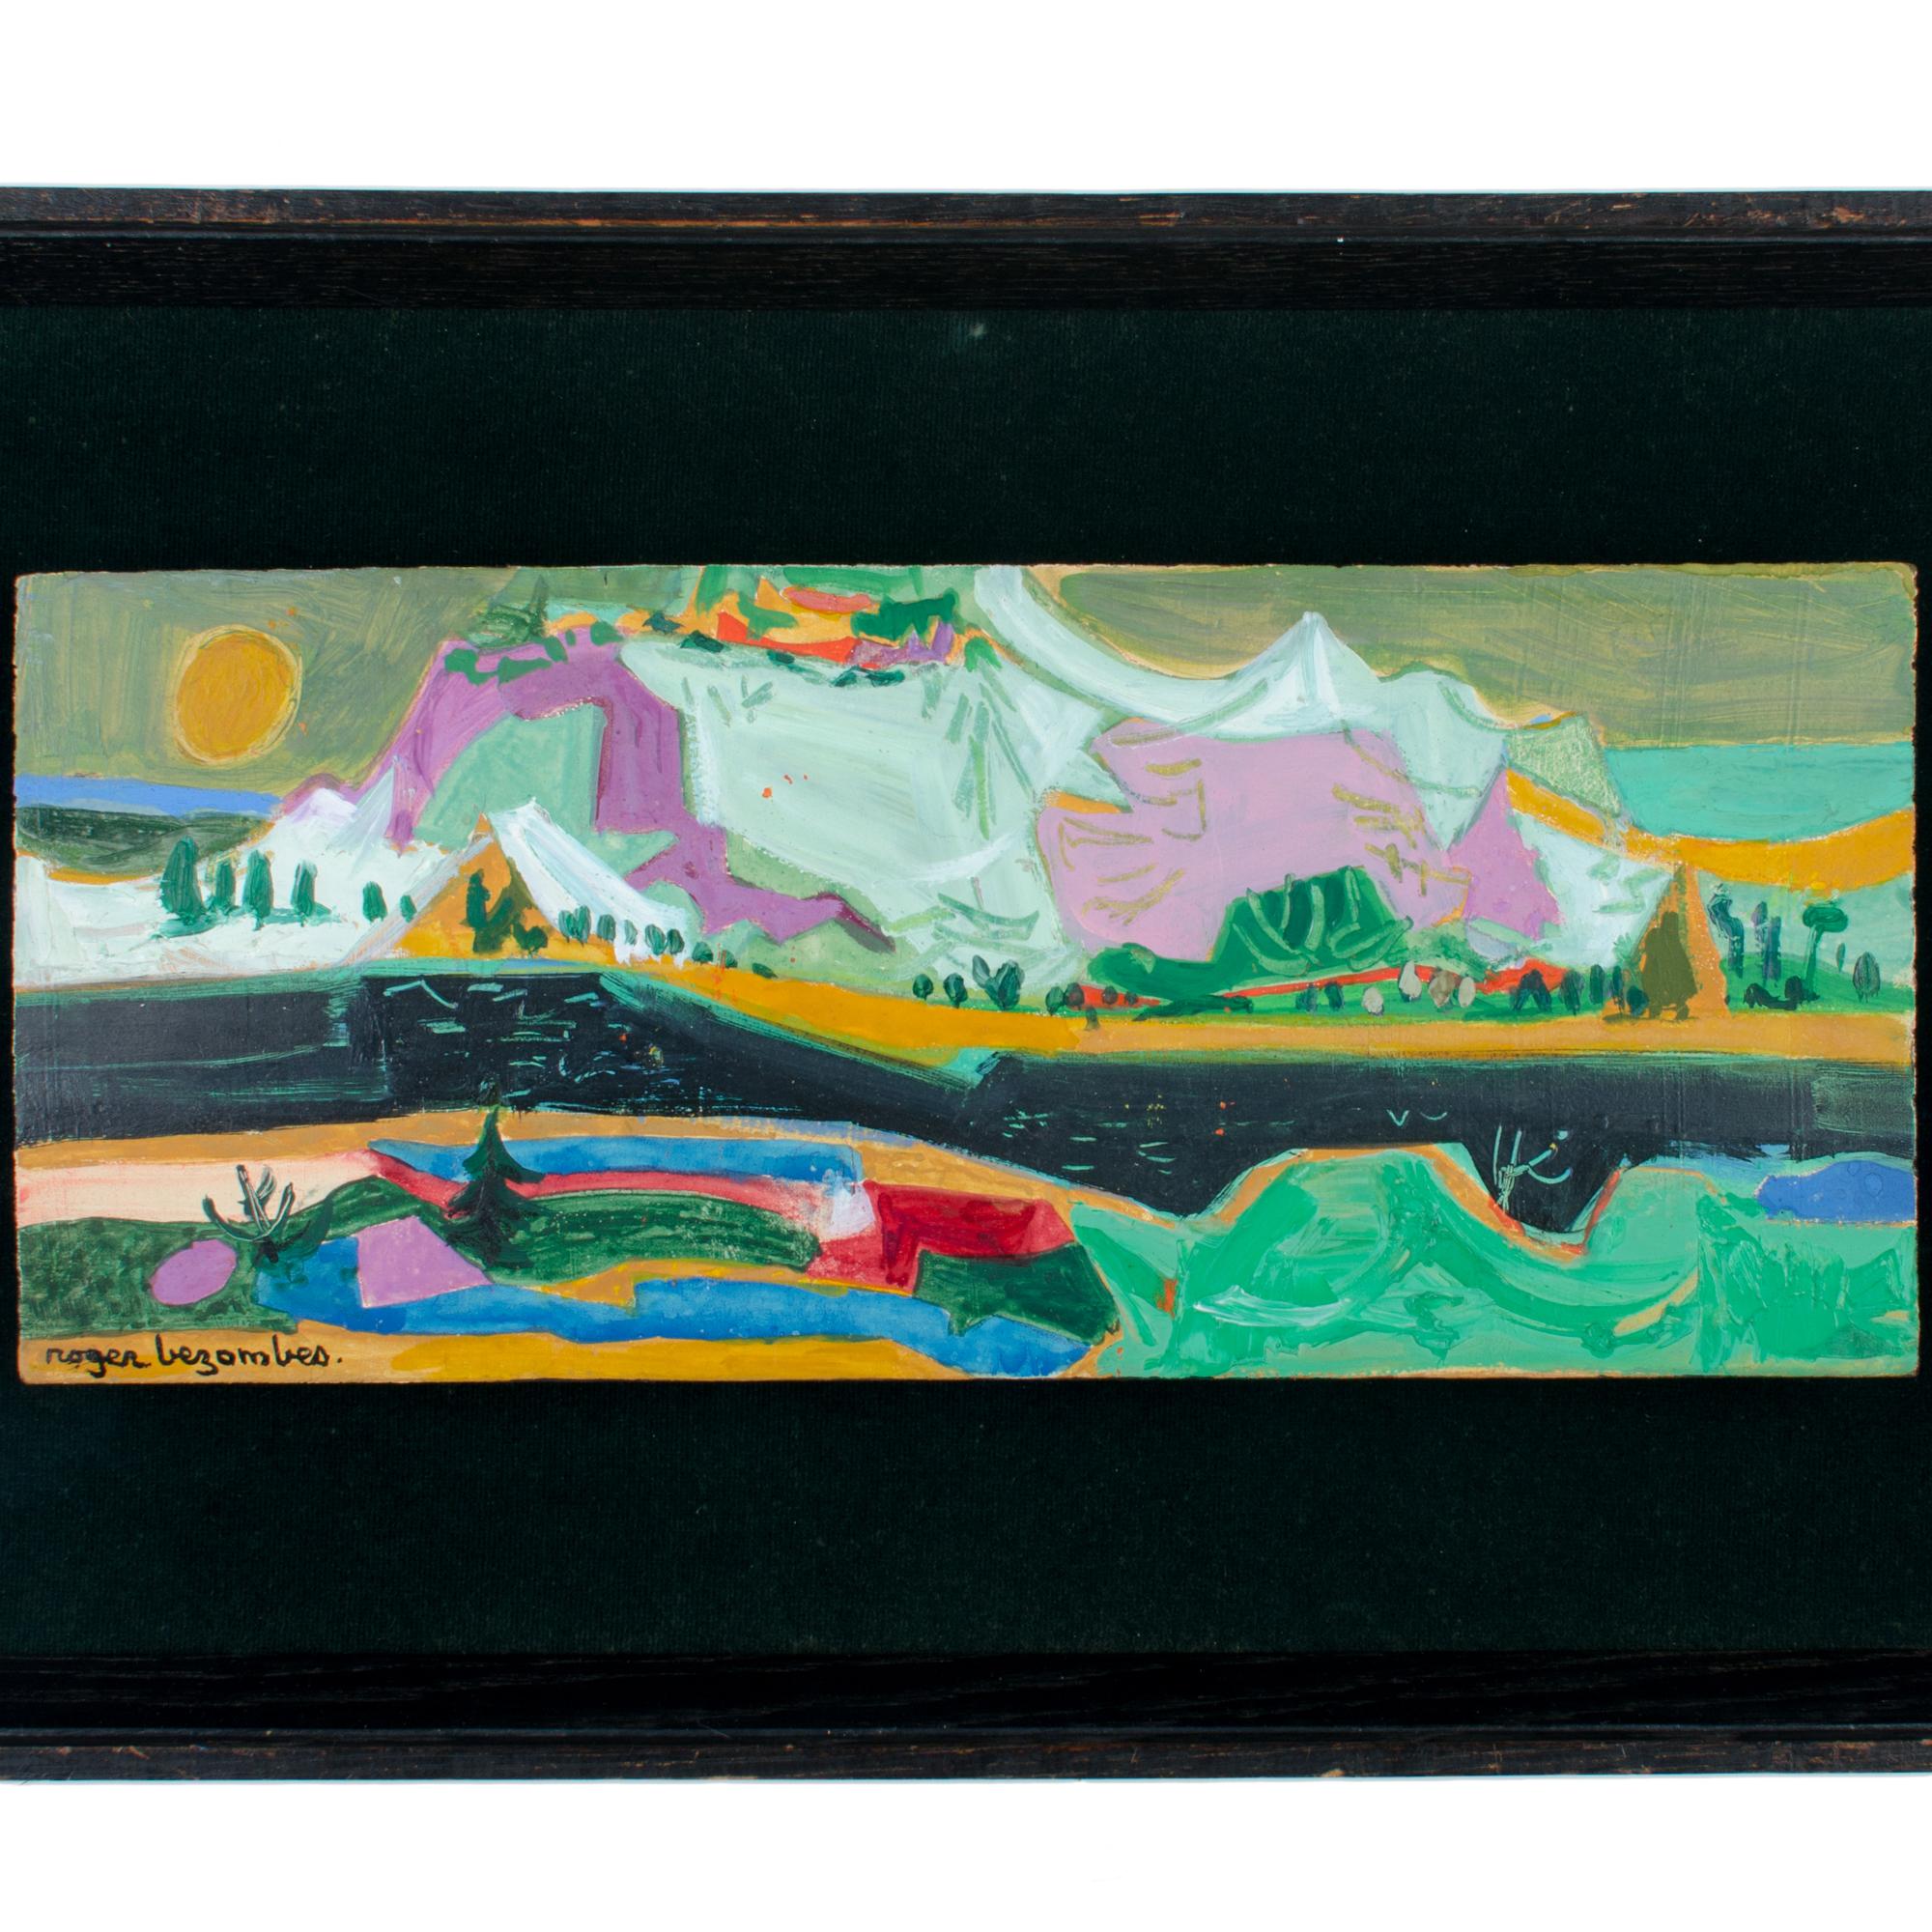 Roger Bezombes
(French, 1913-1994)

Neige	
oil on panel
sight 5½ by 13 inches
frame 10⅝ by 18 inches by 2 inches deep
signed lower left roger bezombes.

Work as orignally presented by the artist under glass and floated in handmade shadowbox.